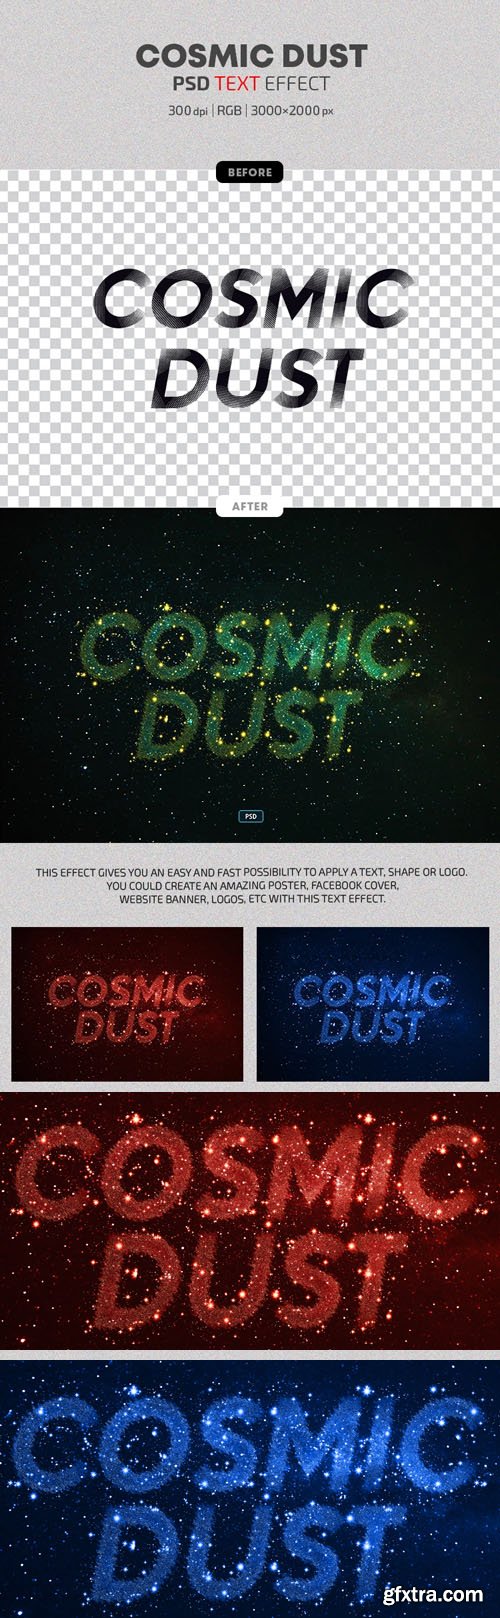 Cosmic Dust - Photoshop Text Effects